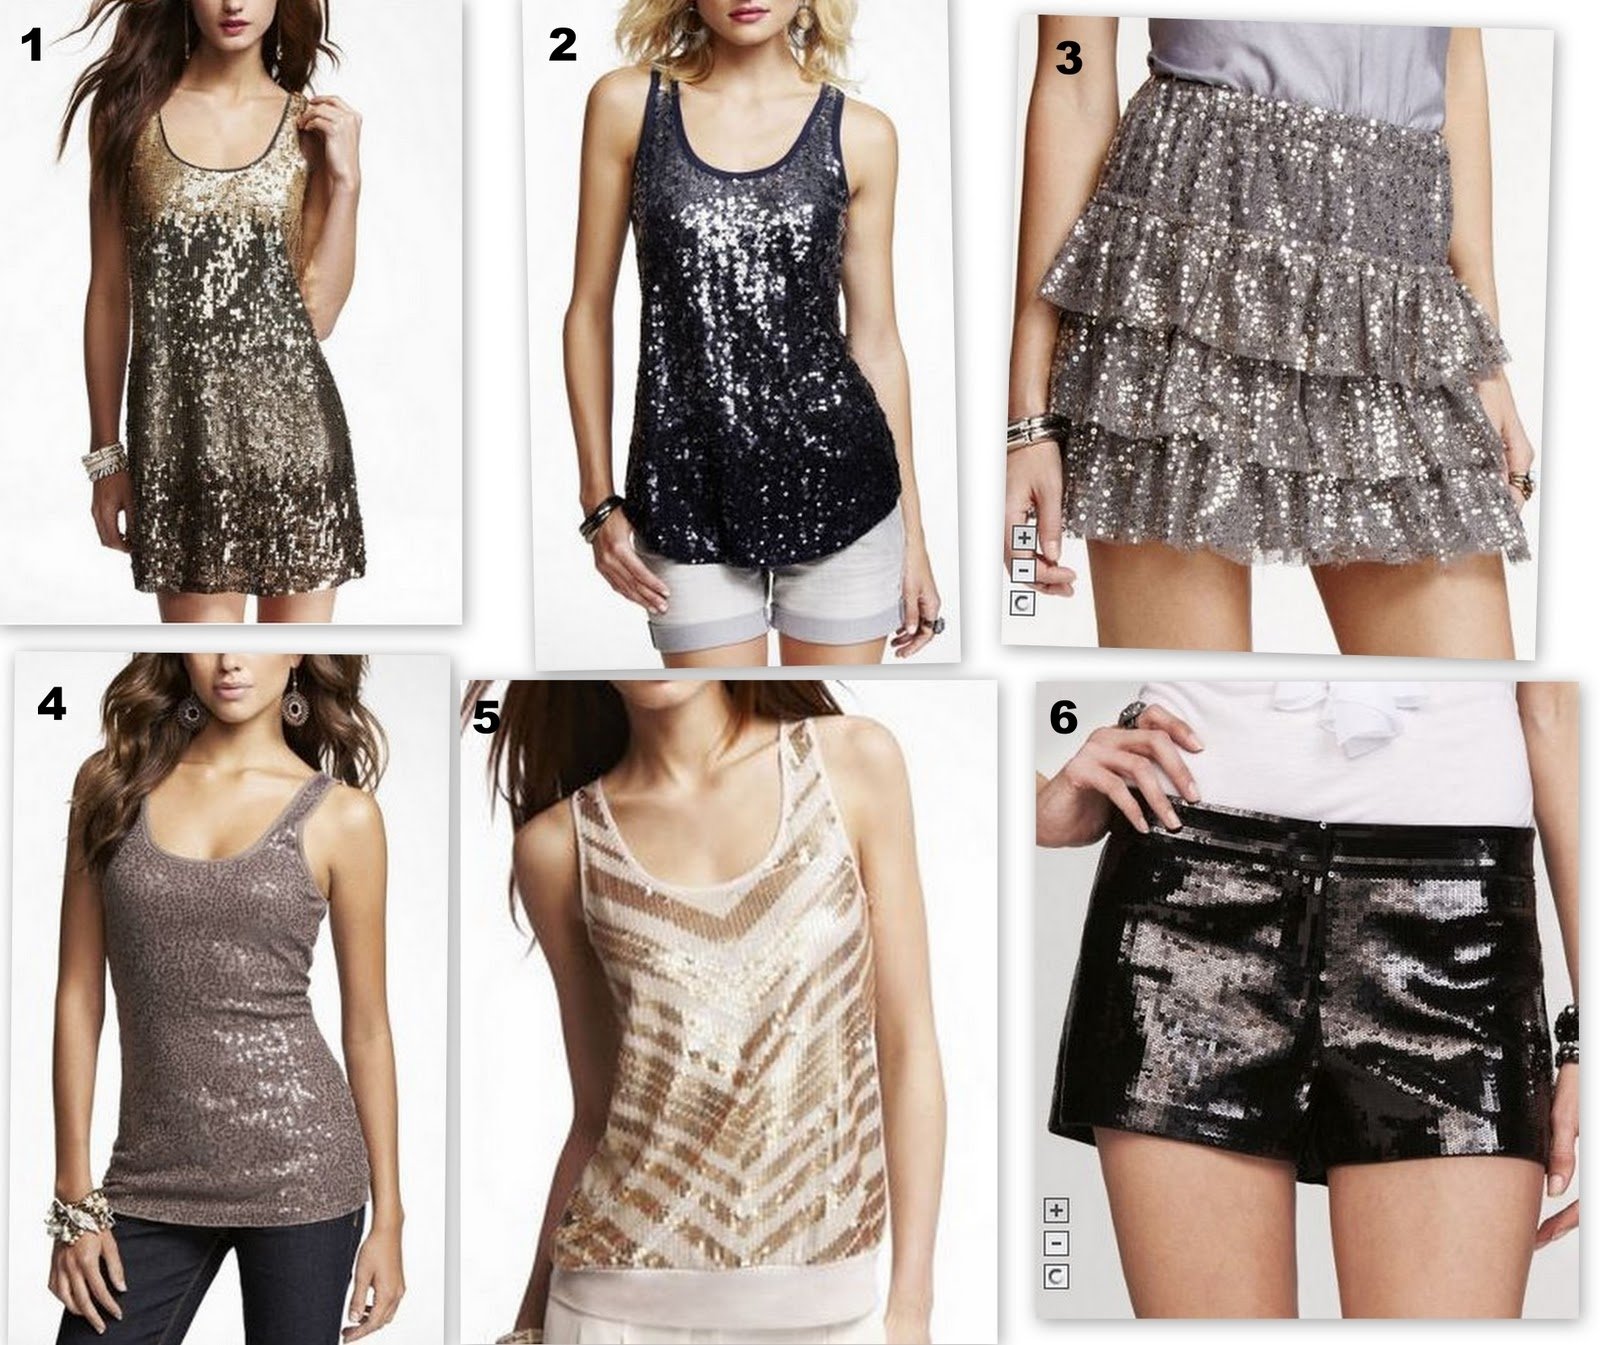 10 Nice New Years Outfit Ideas 2013 sparkly new years outfit ideas from express 1 nail design emsies 2022